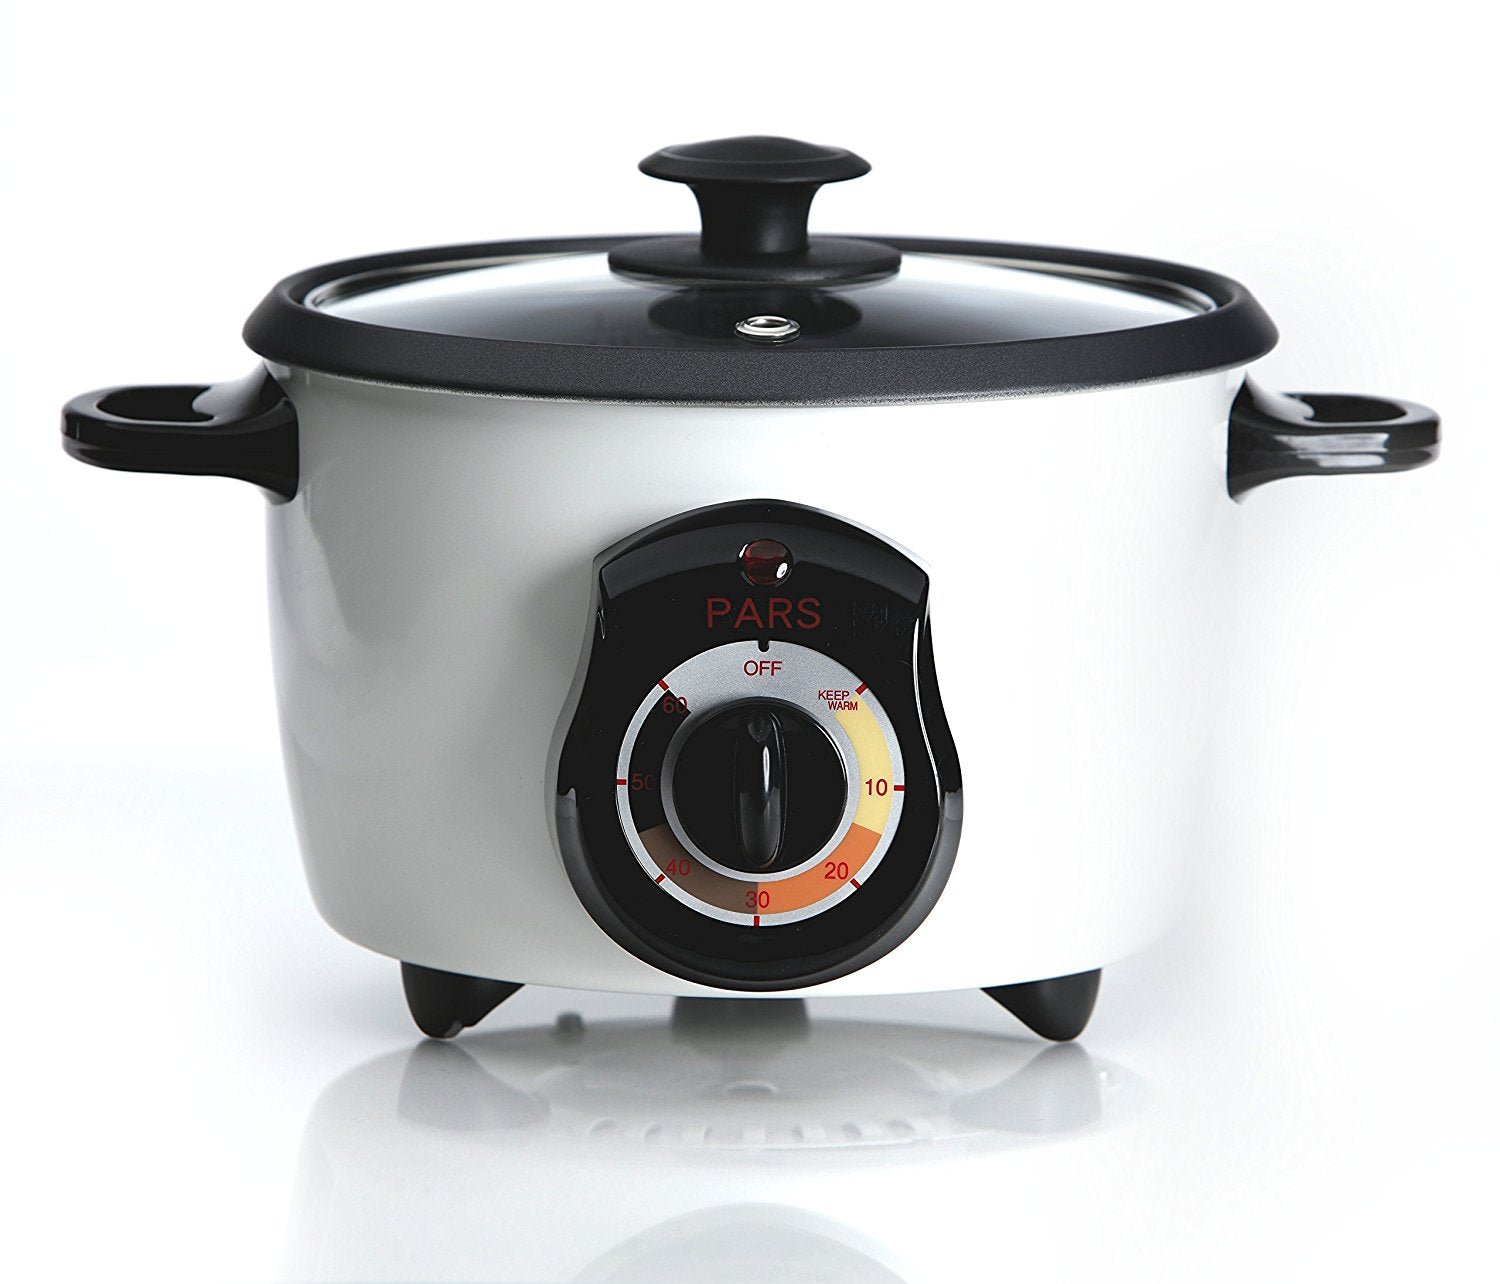 5 CUP Rice Cooker Automatic - Rice Crust (Tahdig)Maker - PoloPaz